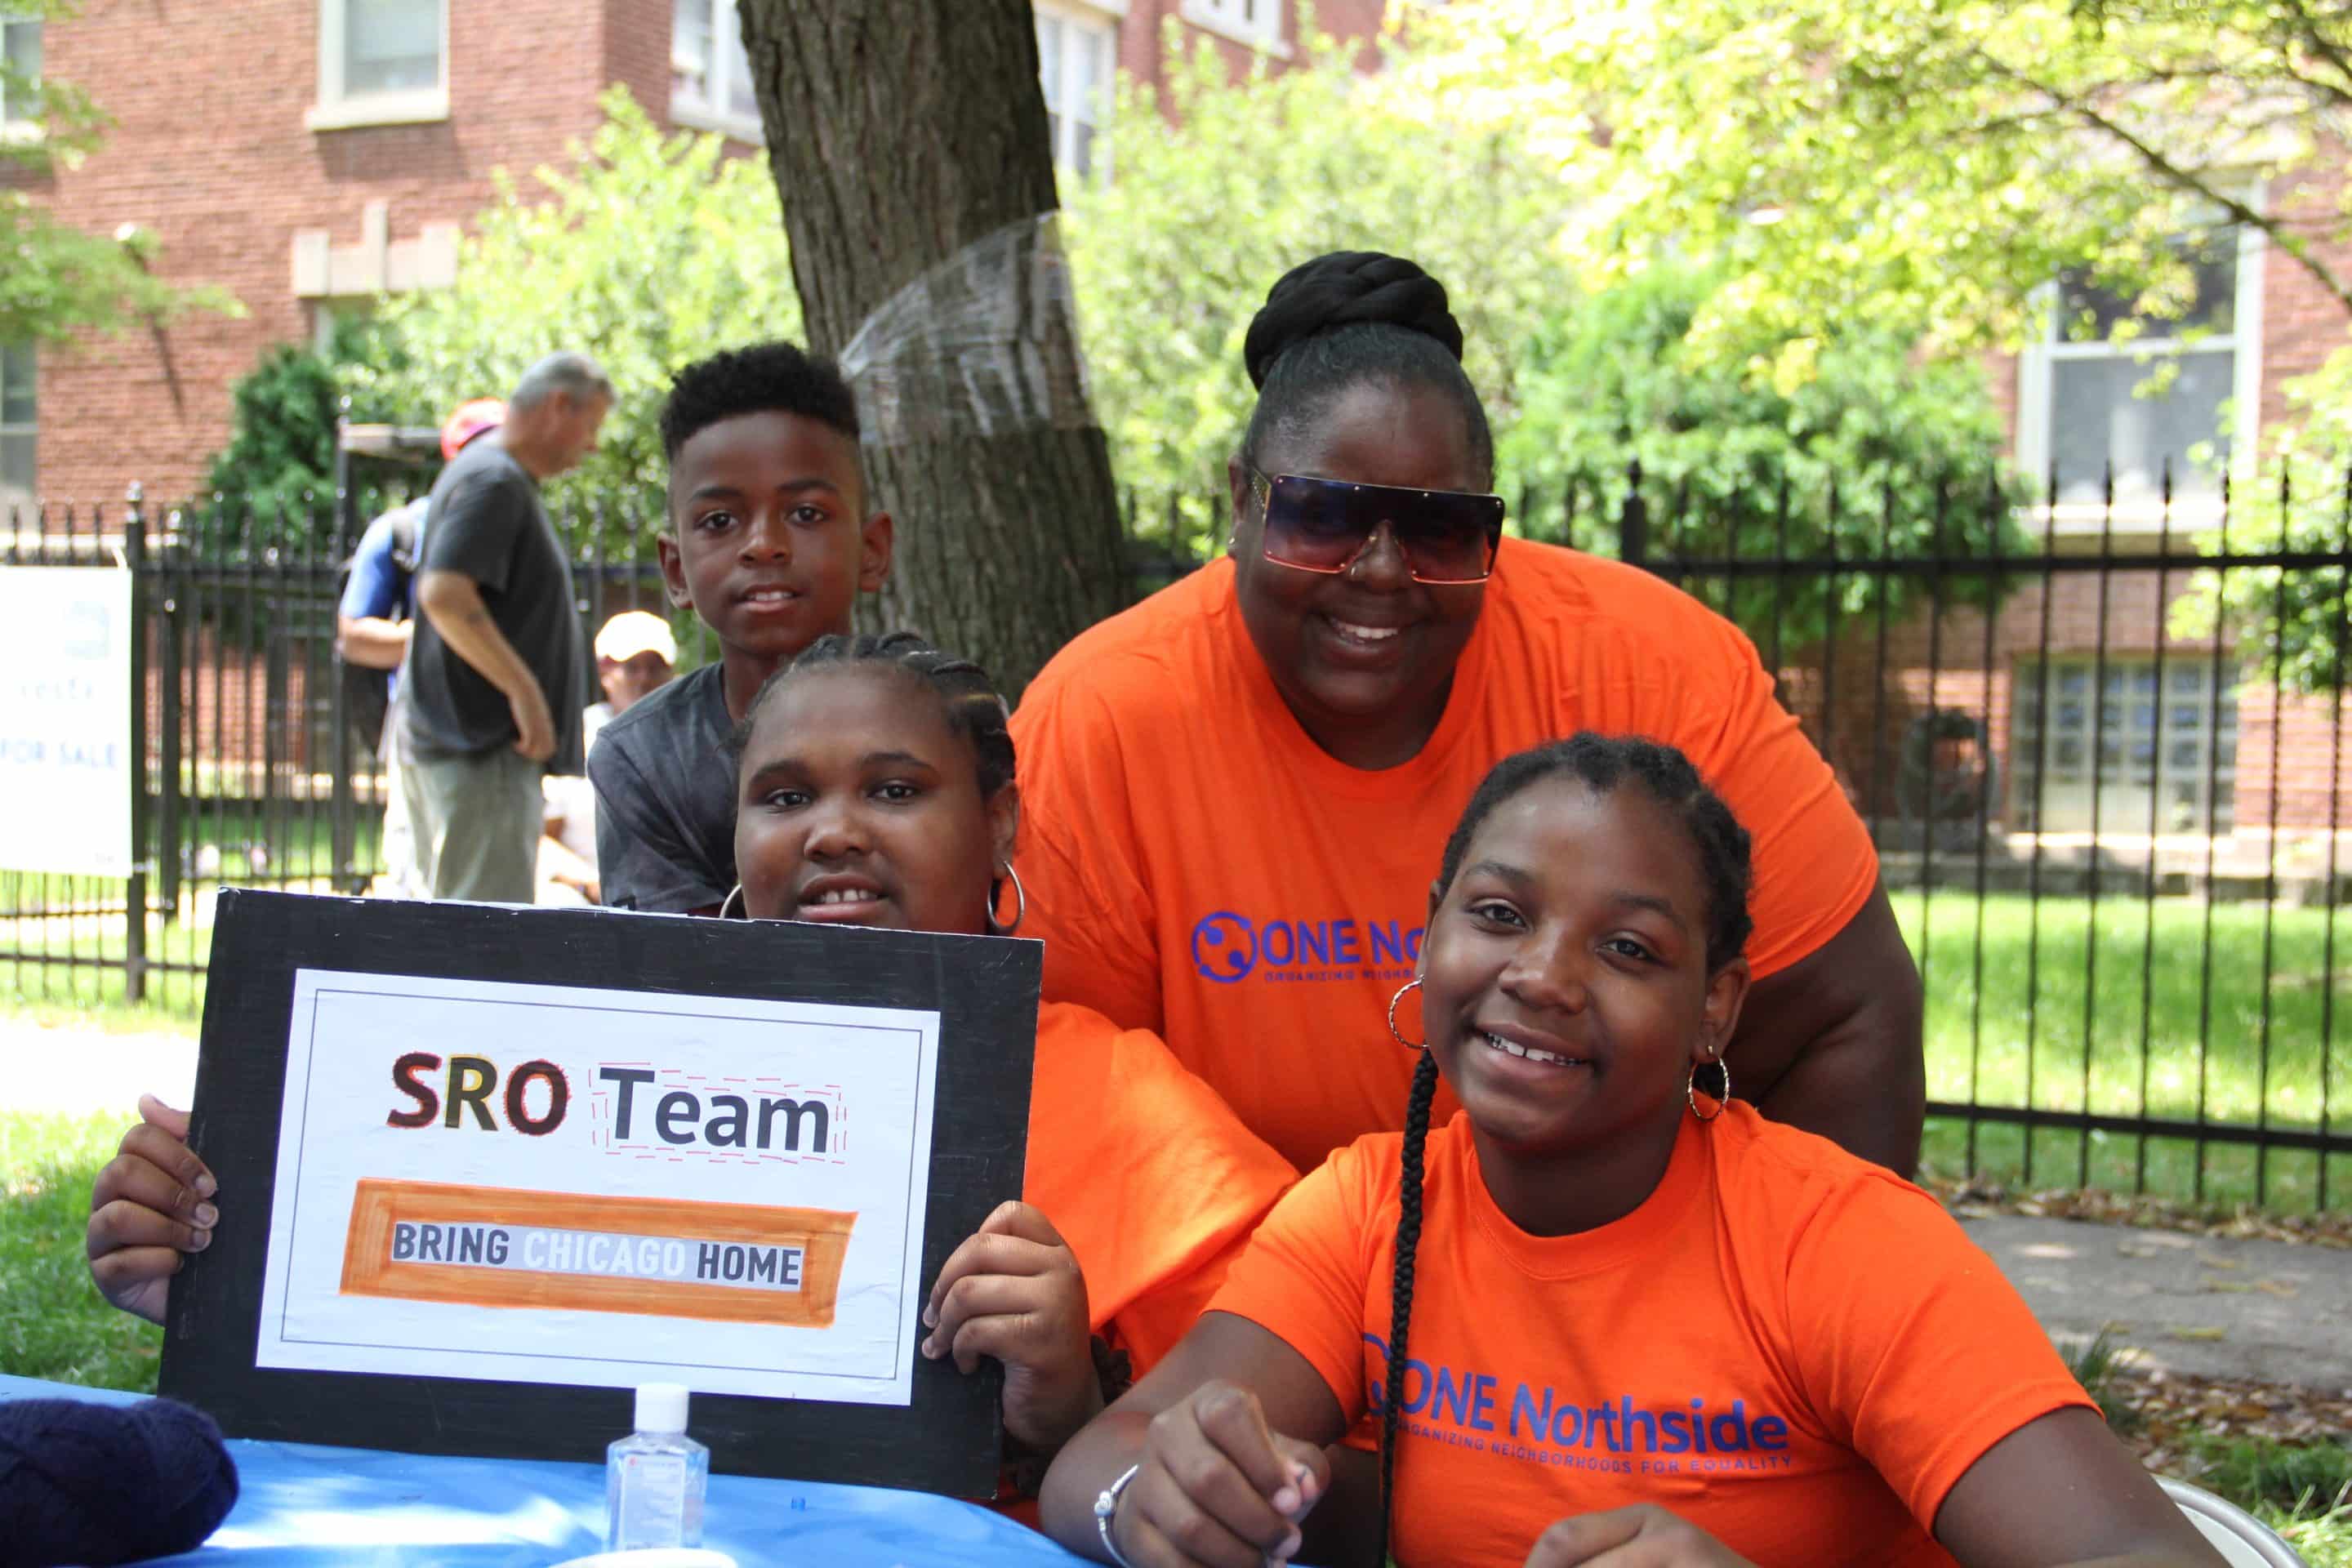 a smiling family in orange shirts with a sign that says SRO team